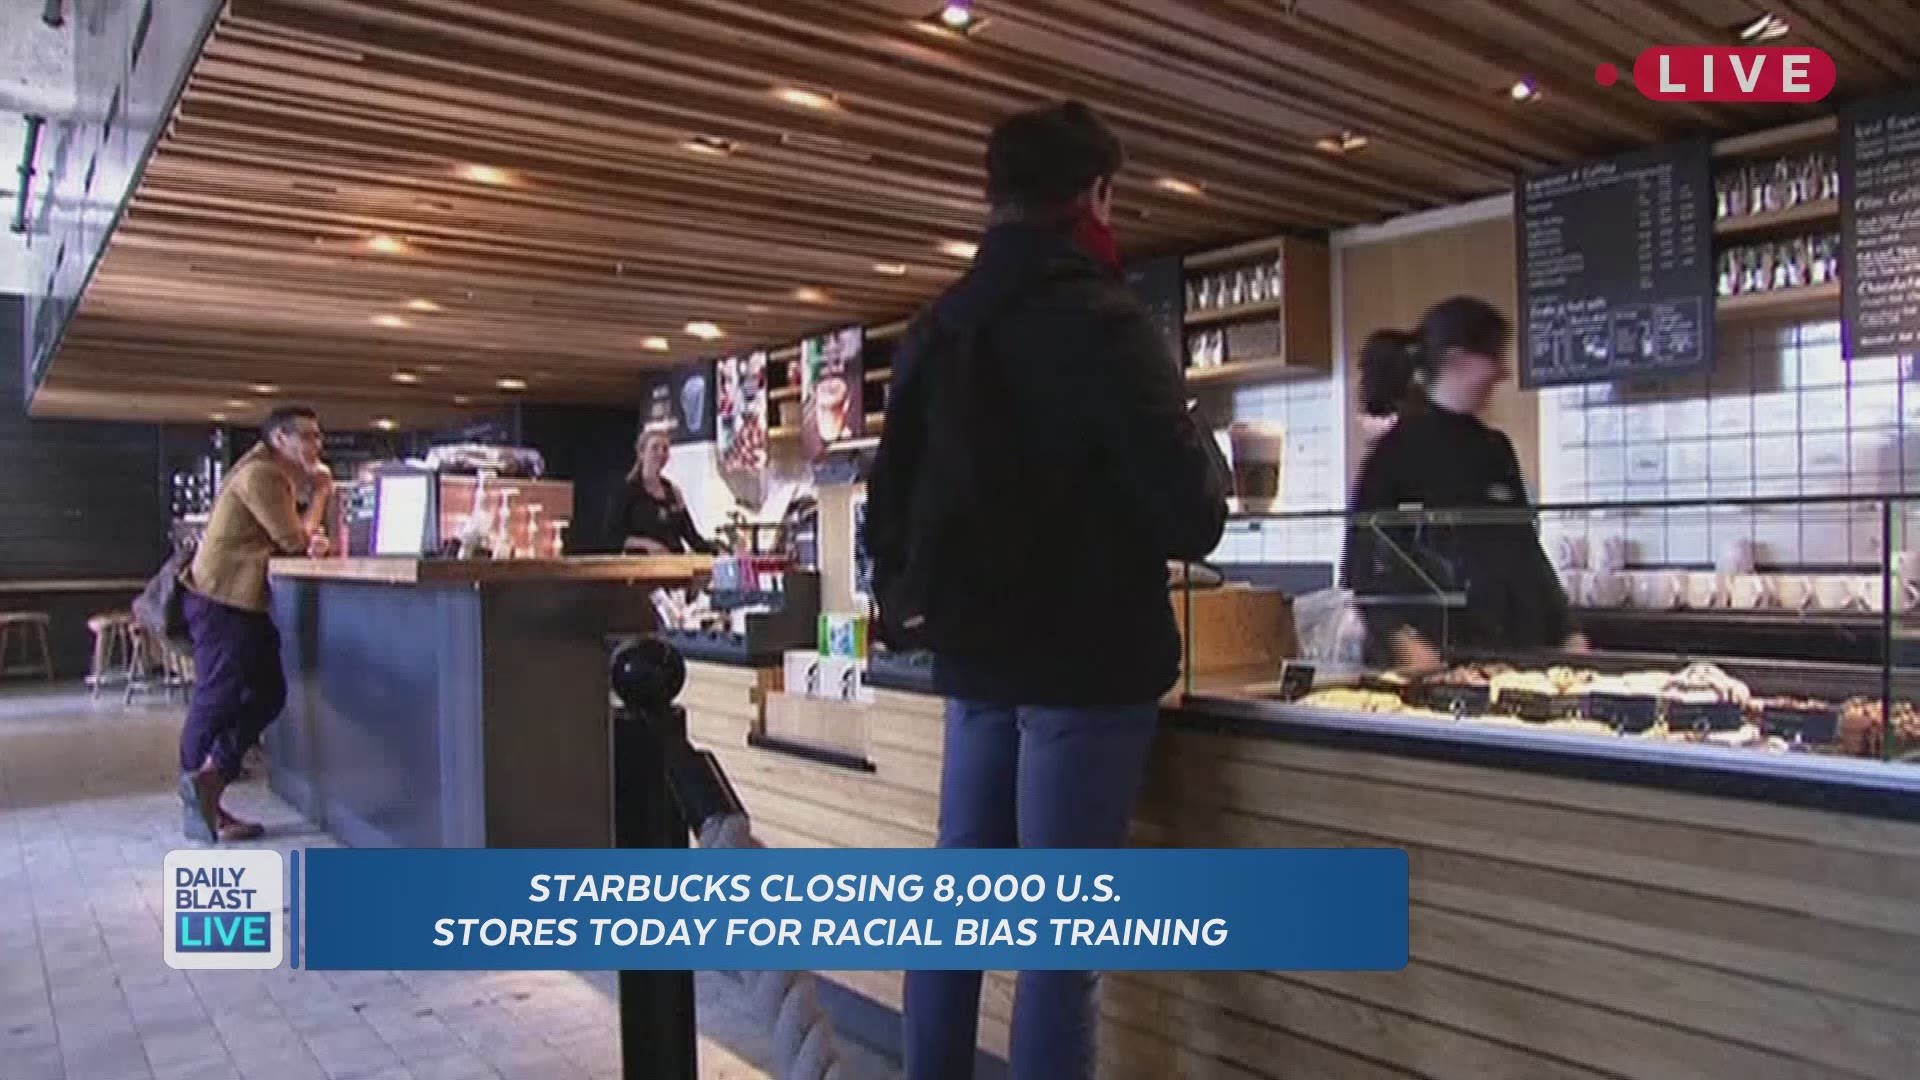 More than 8,000 Starbucks stores are closing their doors today to undergo racial bias training for their employees. This move came in direct response to the arrest of two black men in Philadelphia back in April. Daily Blast LIVE spoke with Starbucks Chief